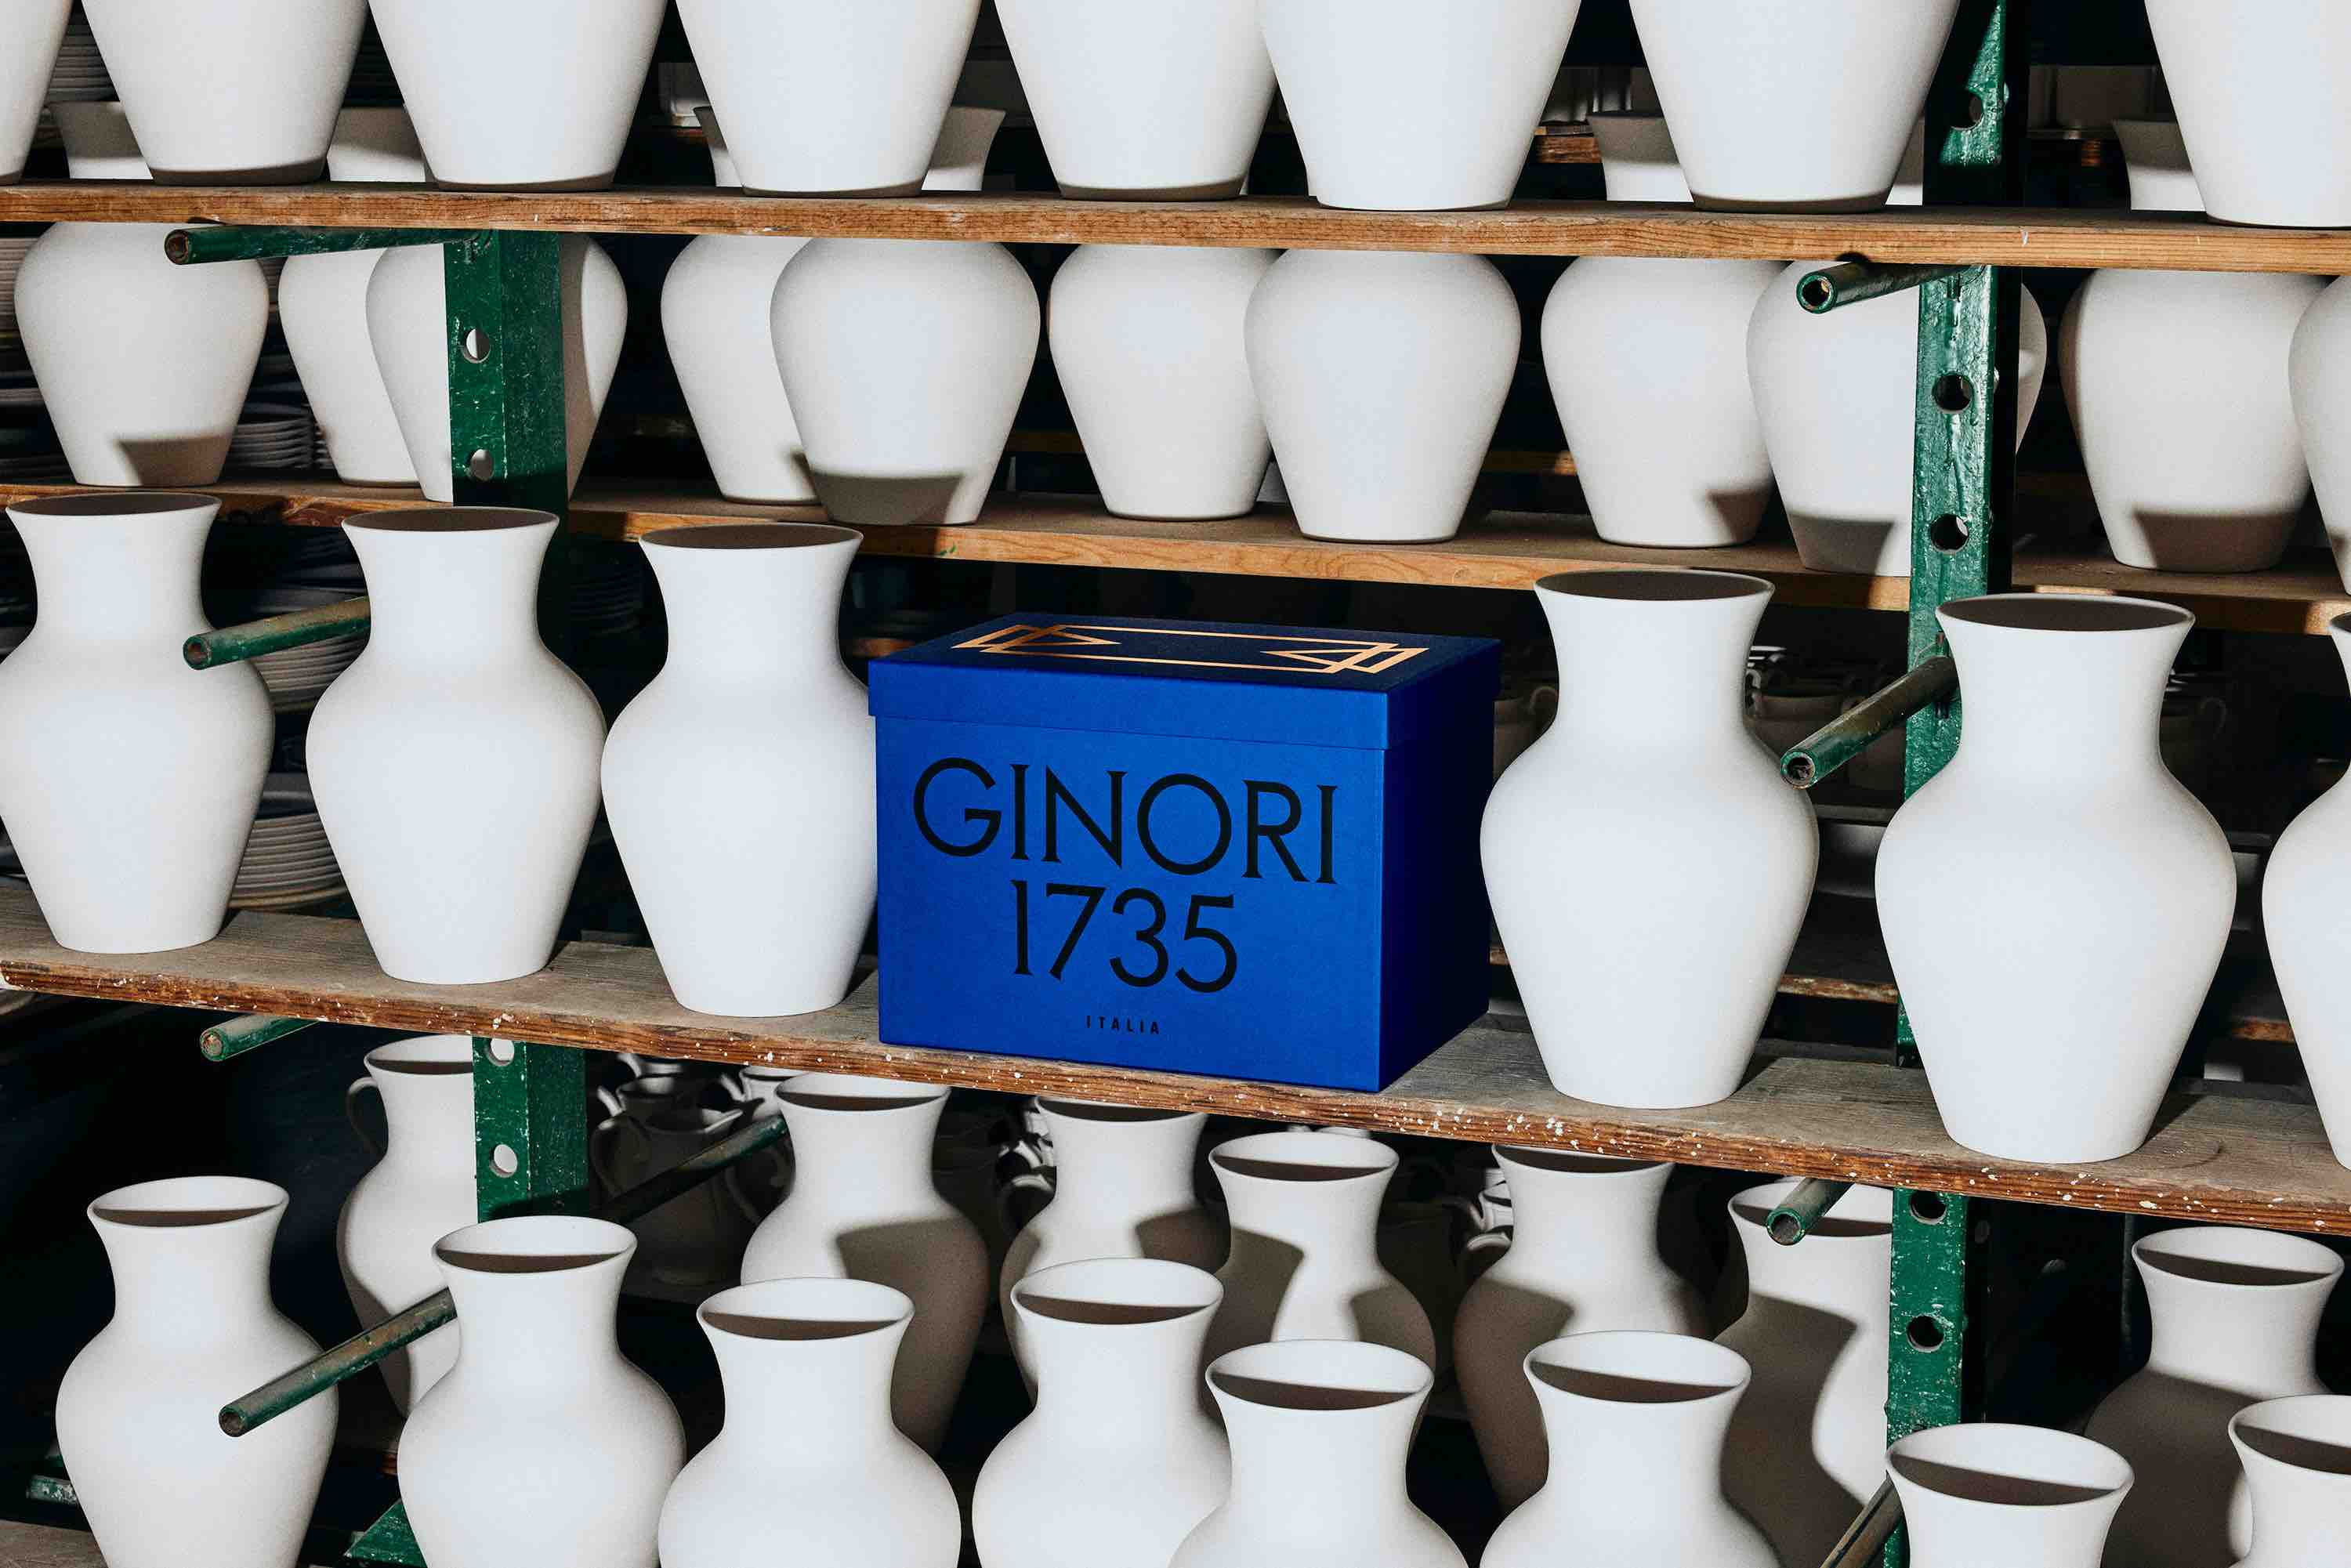 Ginori 1735 Heritage Boxes, Merging Heritage with Modernity in Luxurious Porcelain Packaging